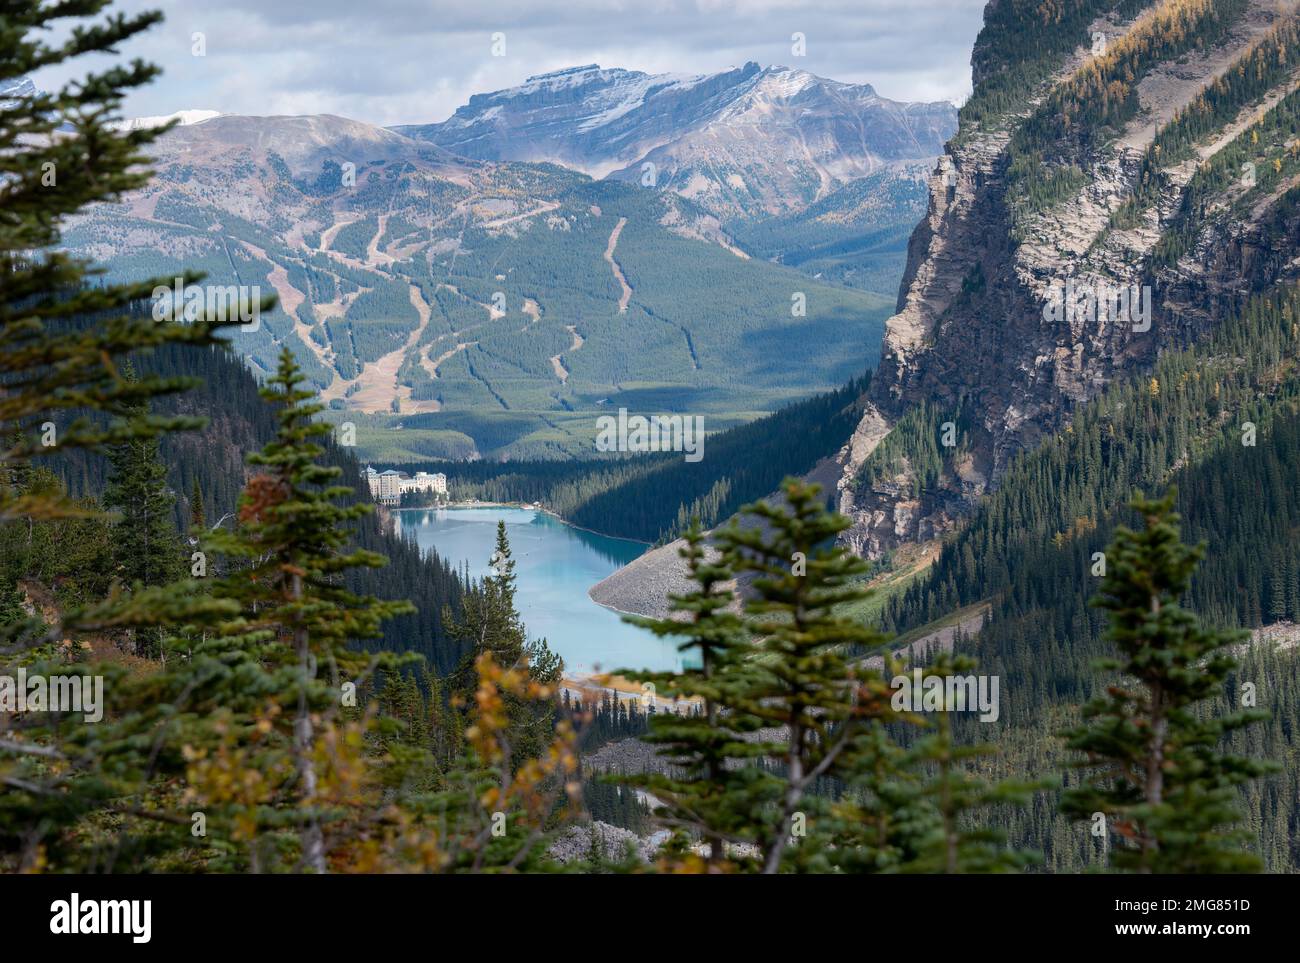 Larch trees framing the view of Lake Louise and Fairmont Chateau from Plain of Six Glaciers Trail in Banff National Park, Canada. Stock Photo